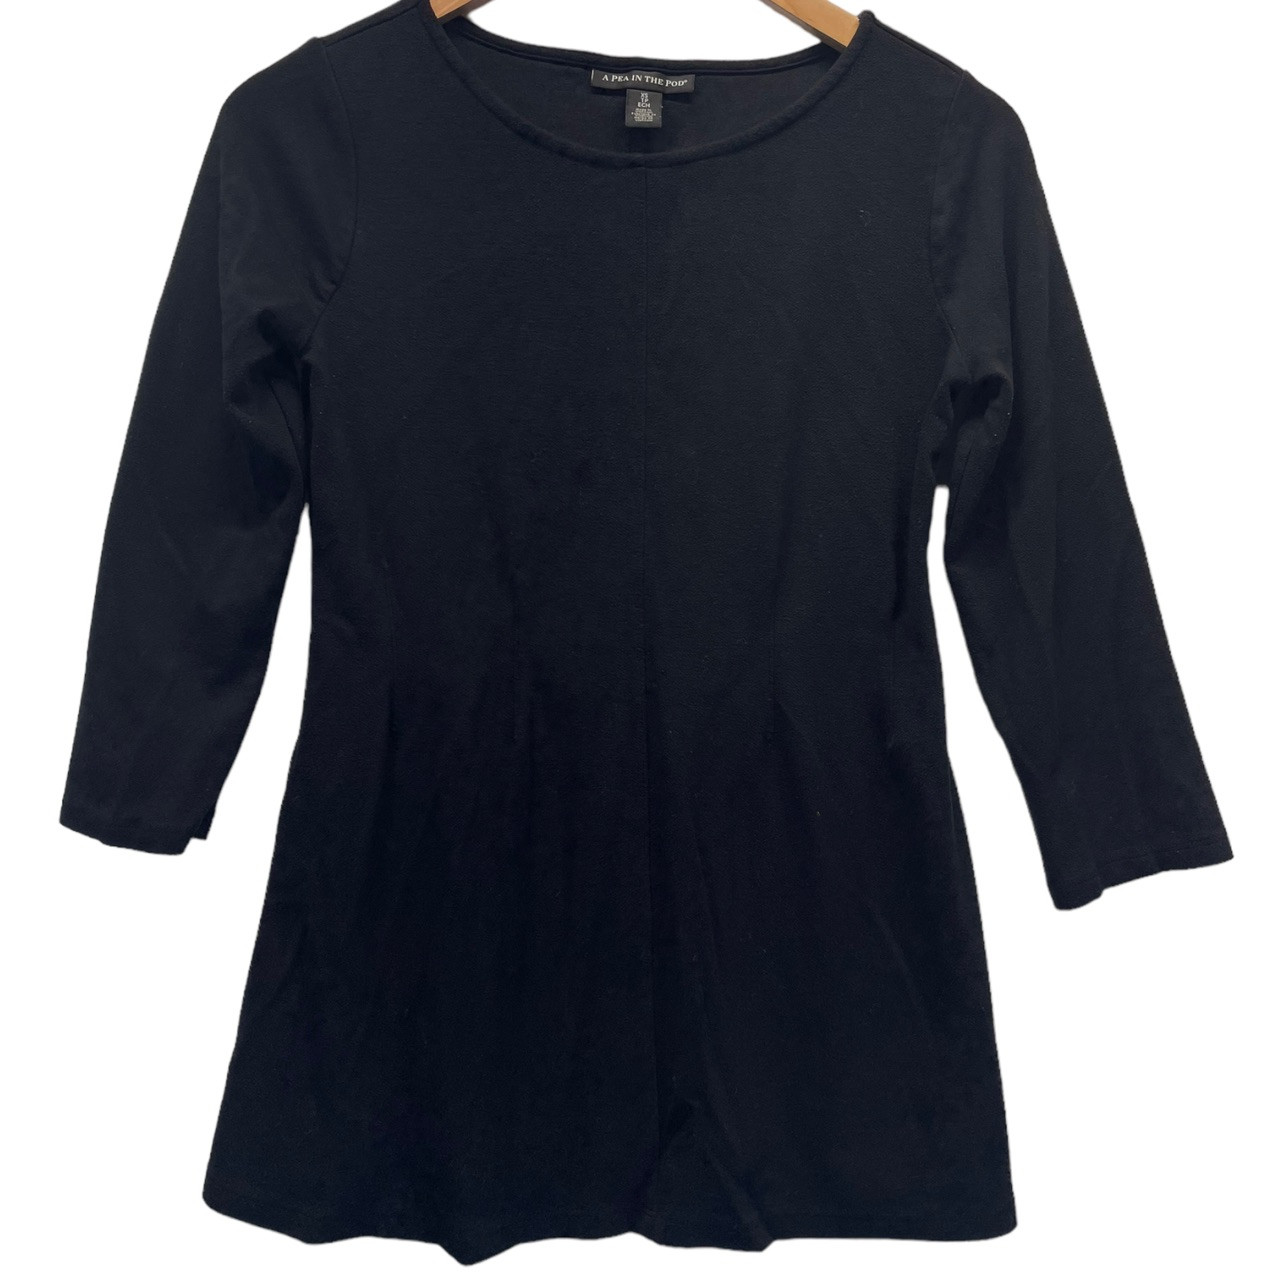 A Pea in the Pod Maternity Black Peplum Fit 3/4 Sleeve Maternity Top |  Gently Used - Size X-Small